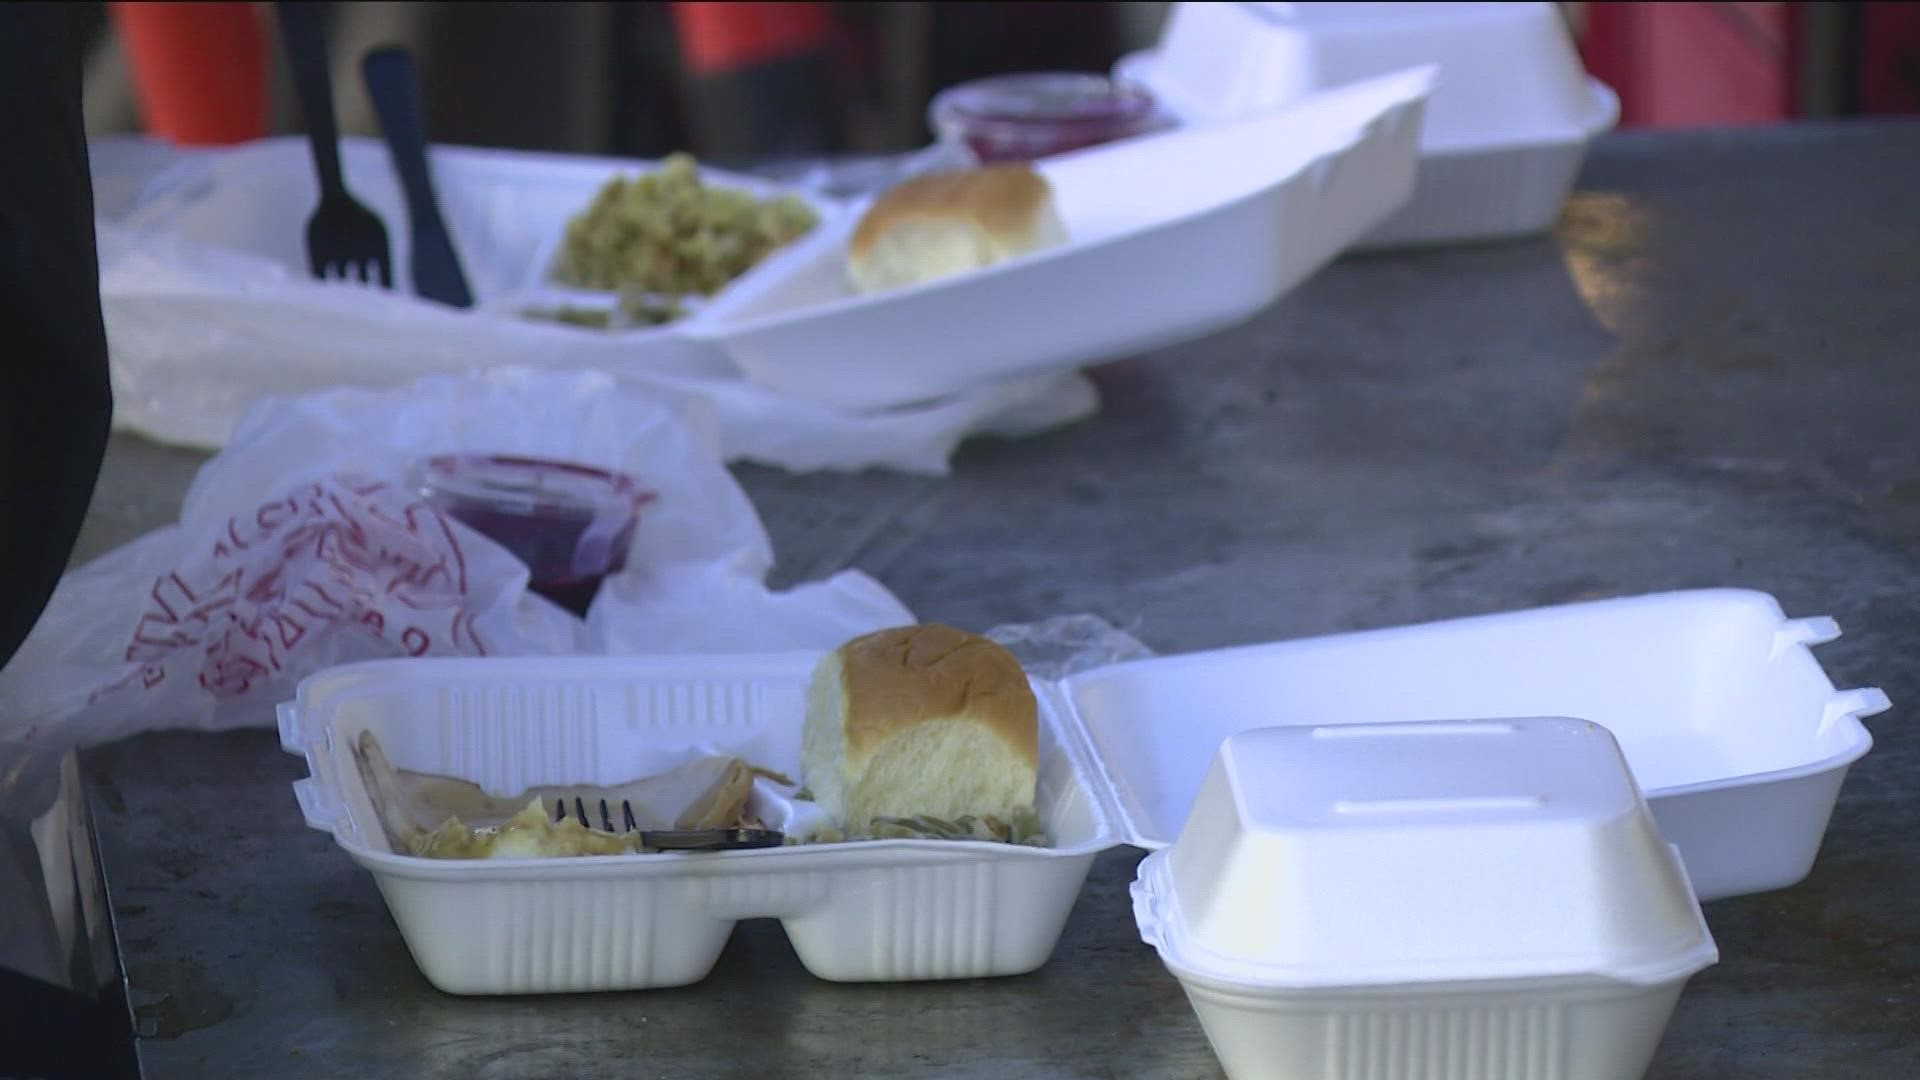 Two businesses, Deja Brew and Mulligans served up food for the community.